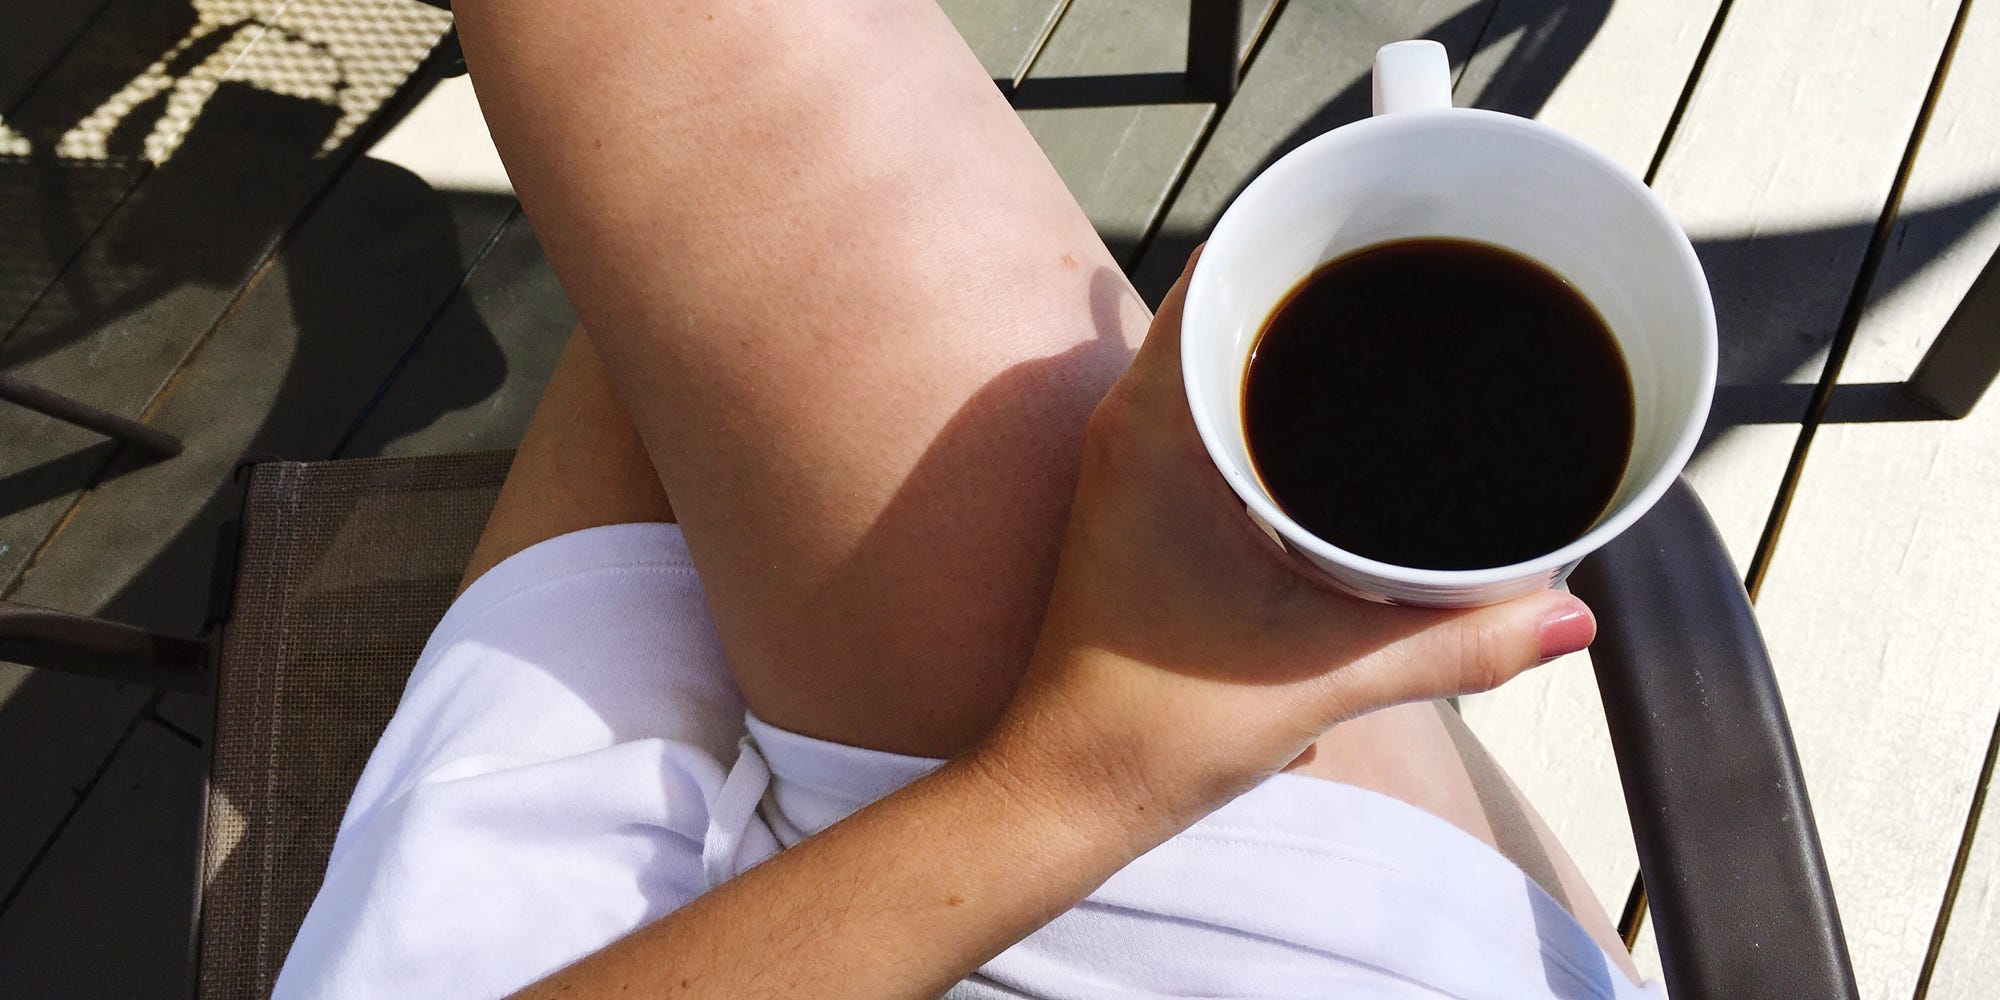 A person sits with their legs crossed holding a cup of coffee.